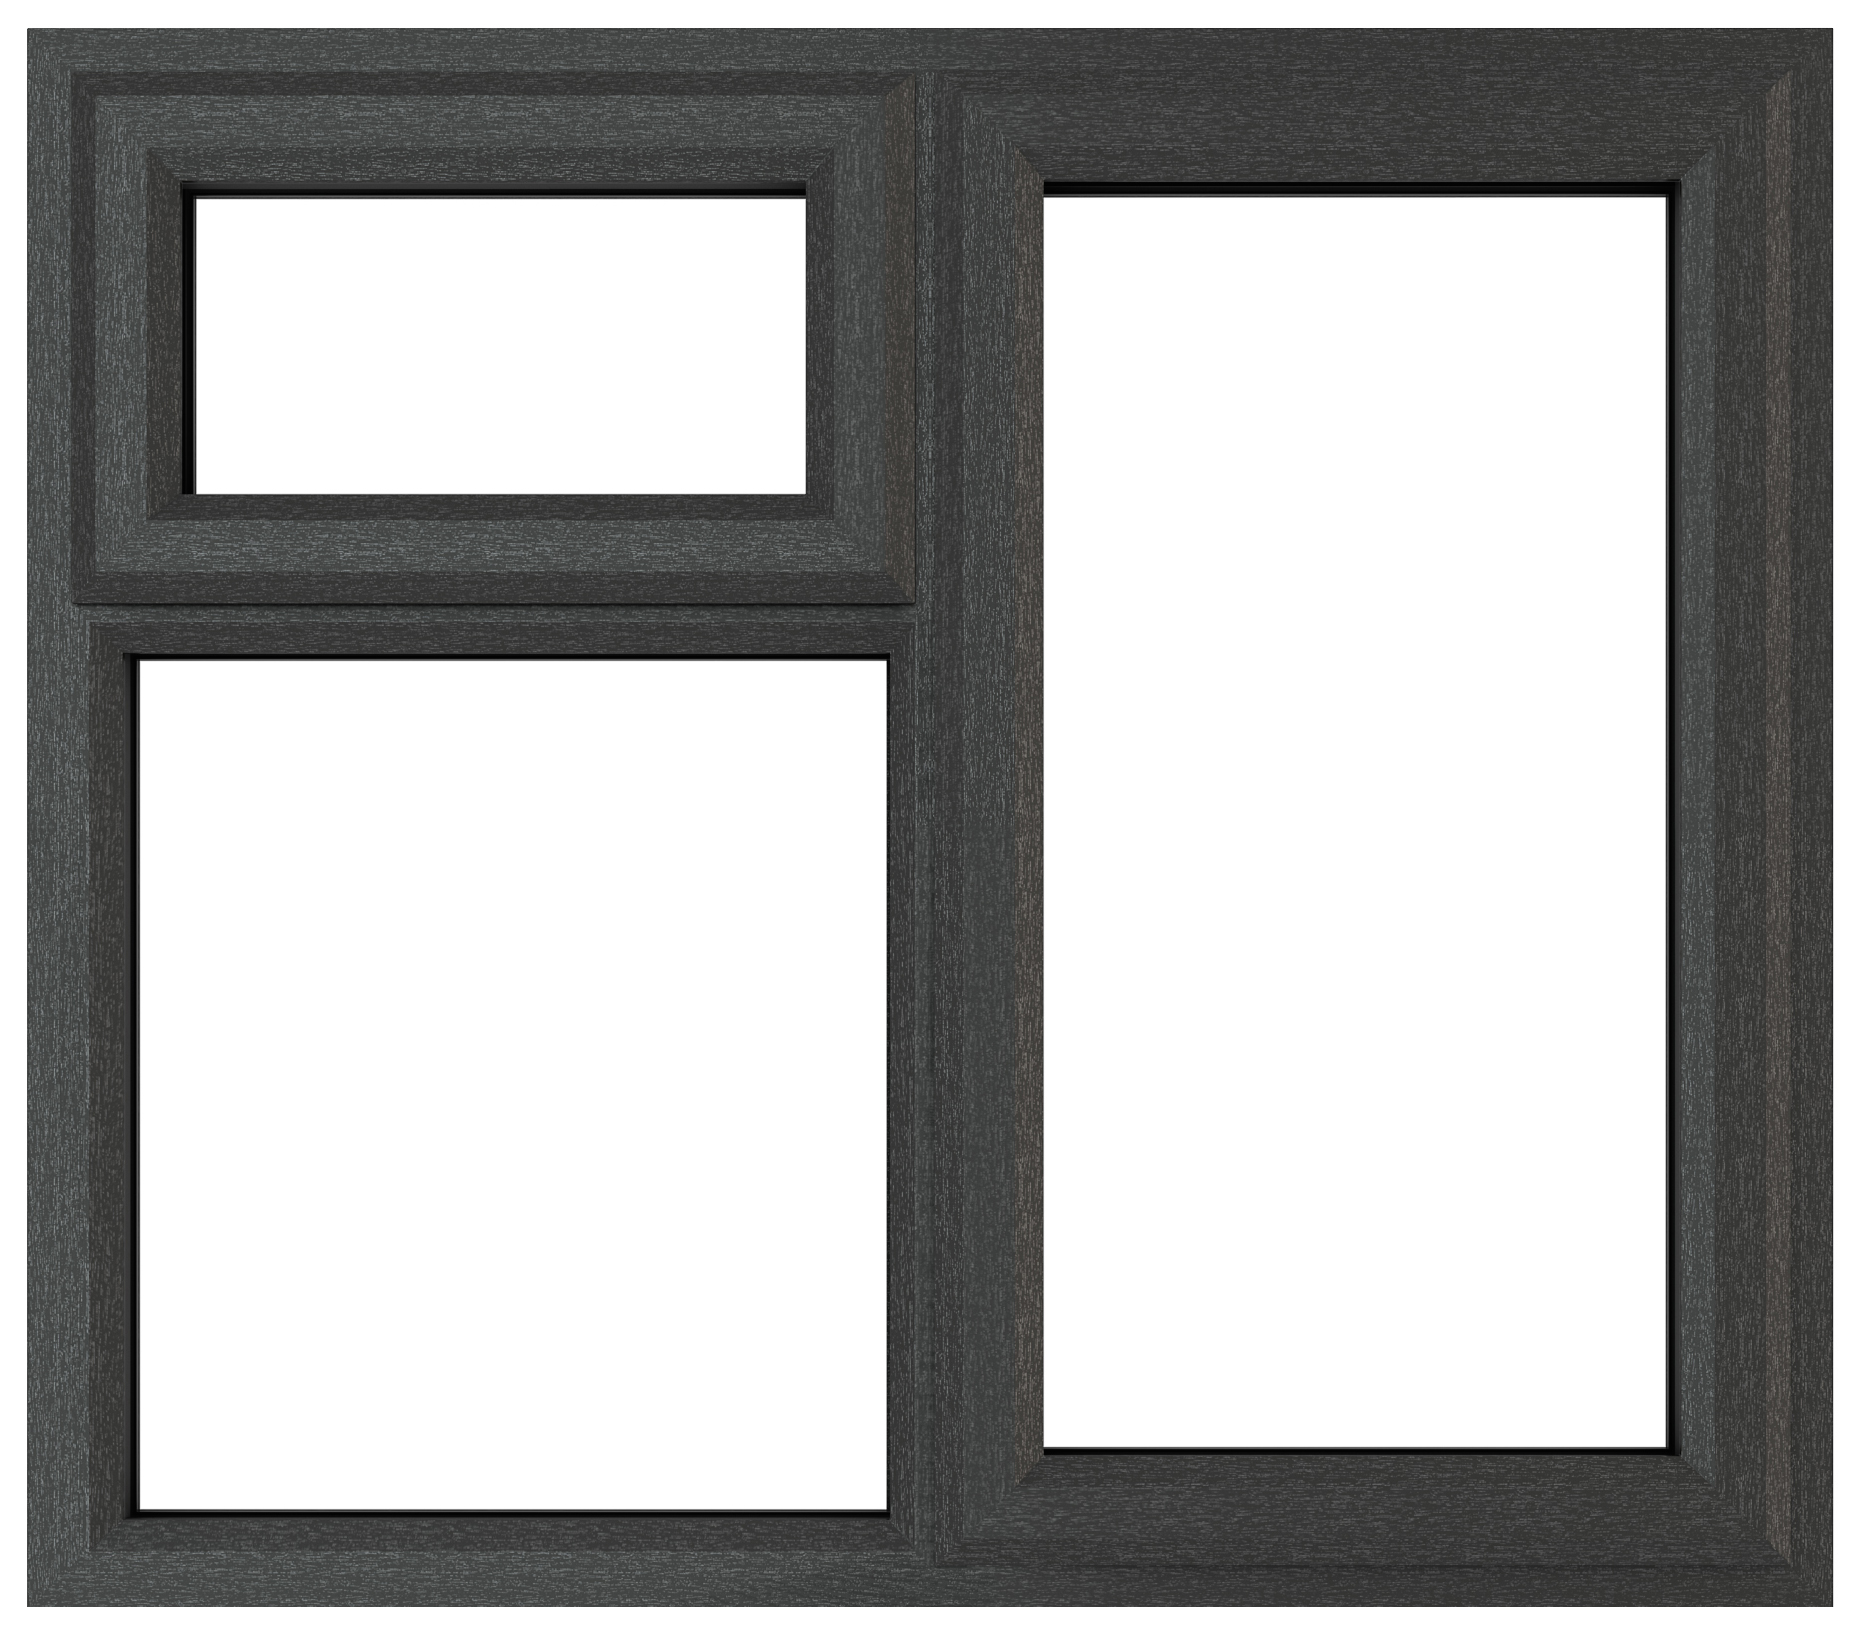 Crystal uPVC Grey Right Hung Top Opener Clear Double Glazed Fixed Light Window - 1190 x 1190mm